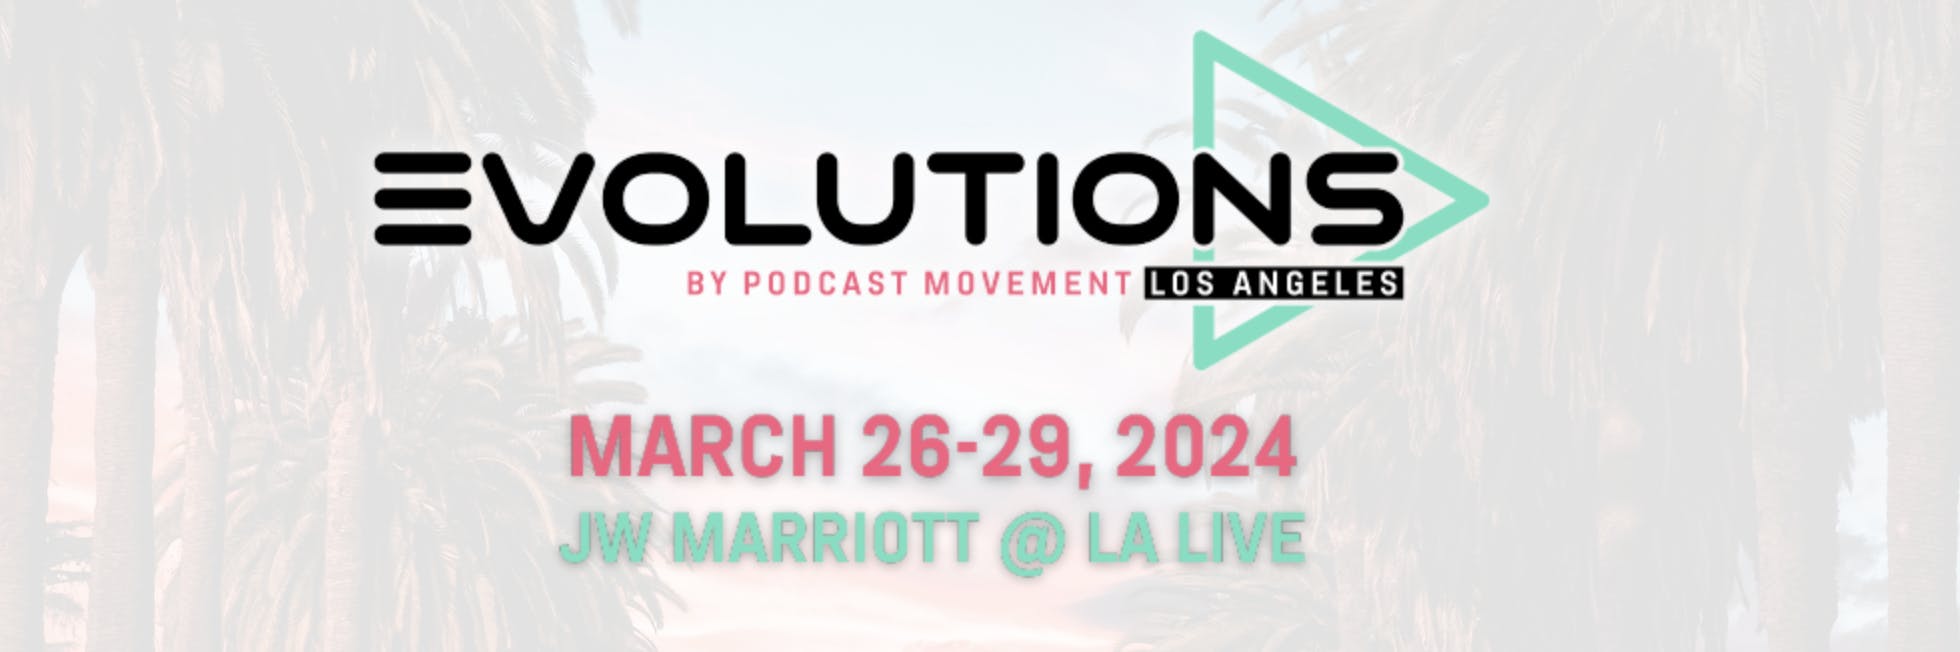 Evolutions by Podcast Movement Logo